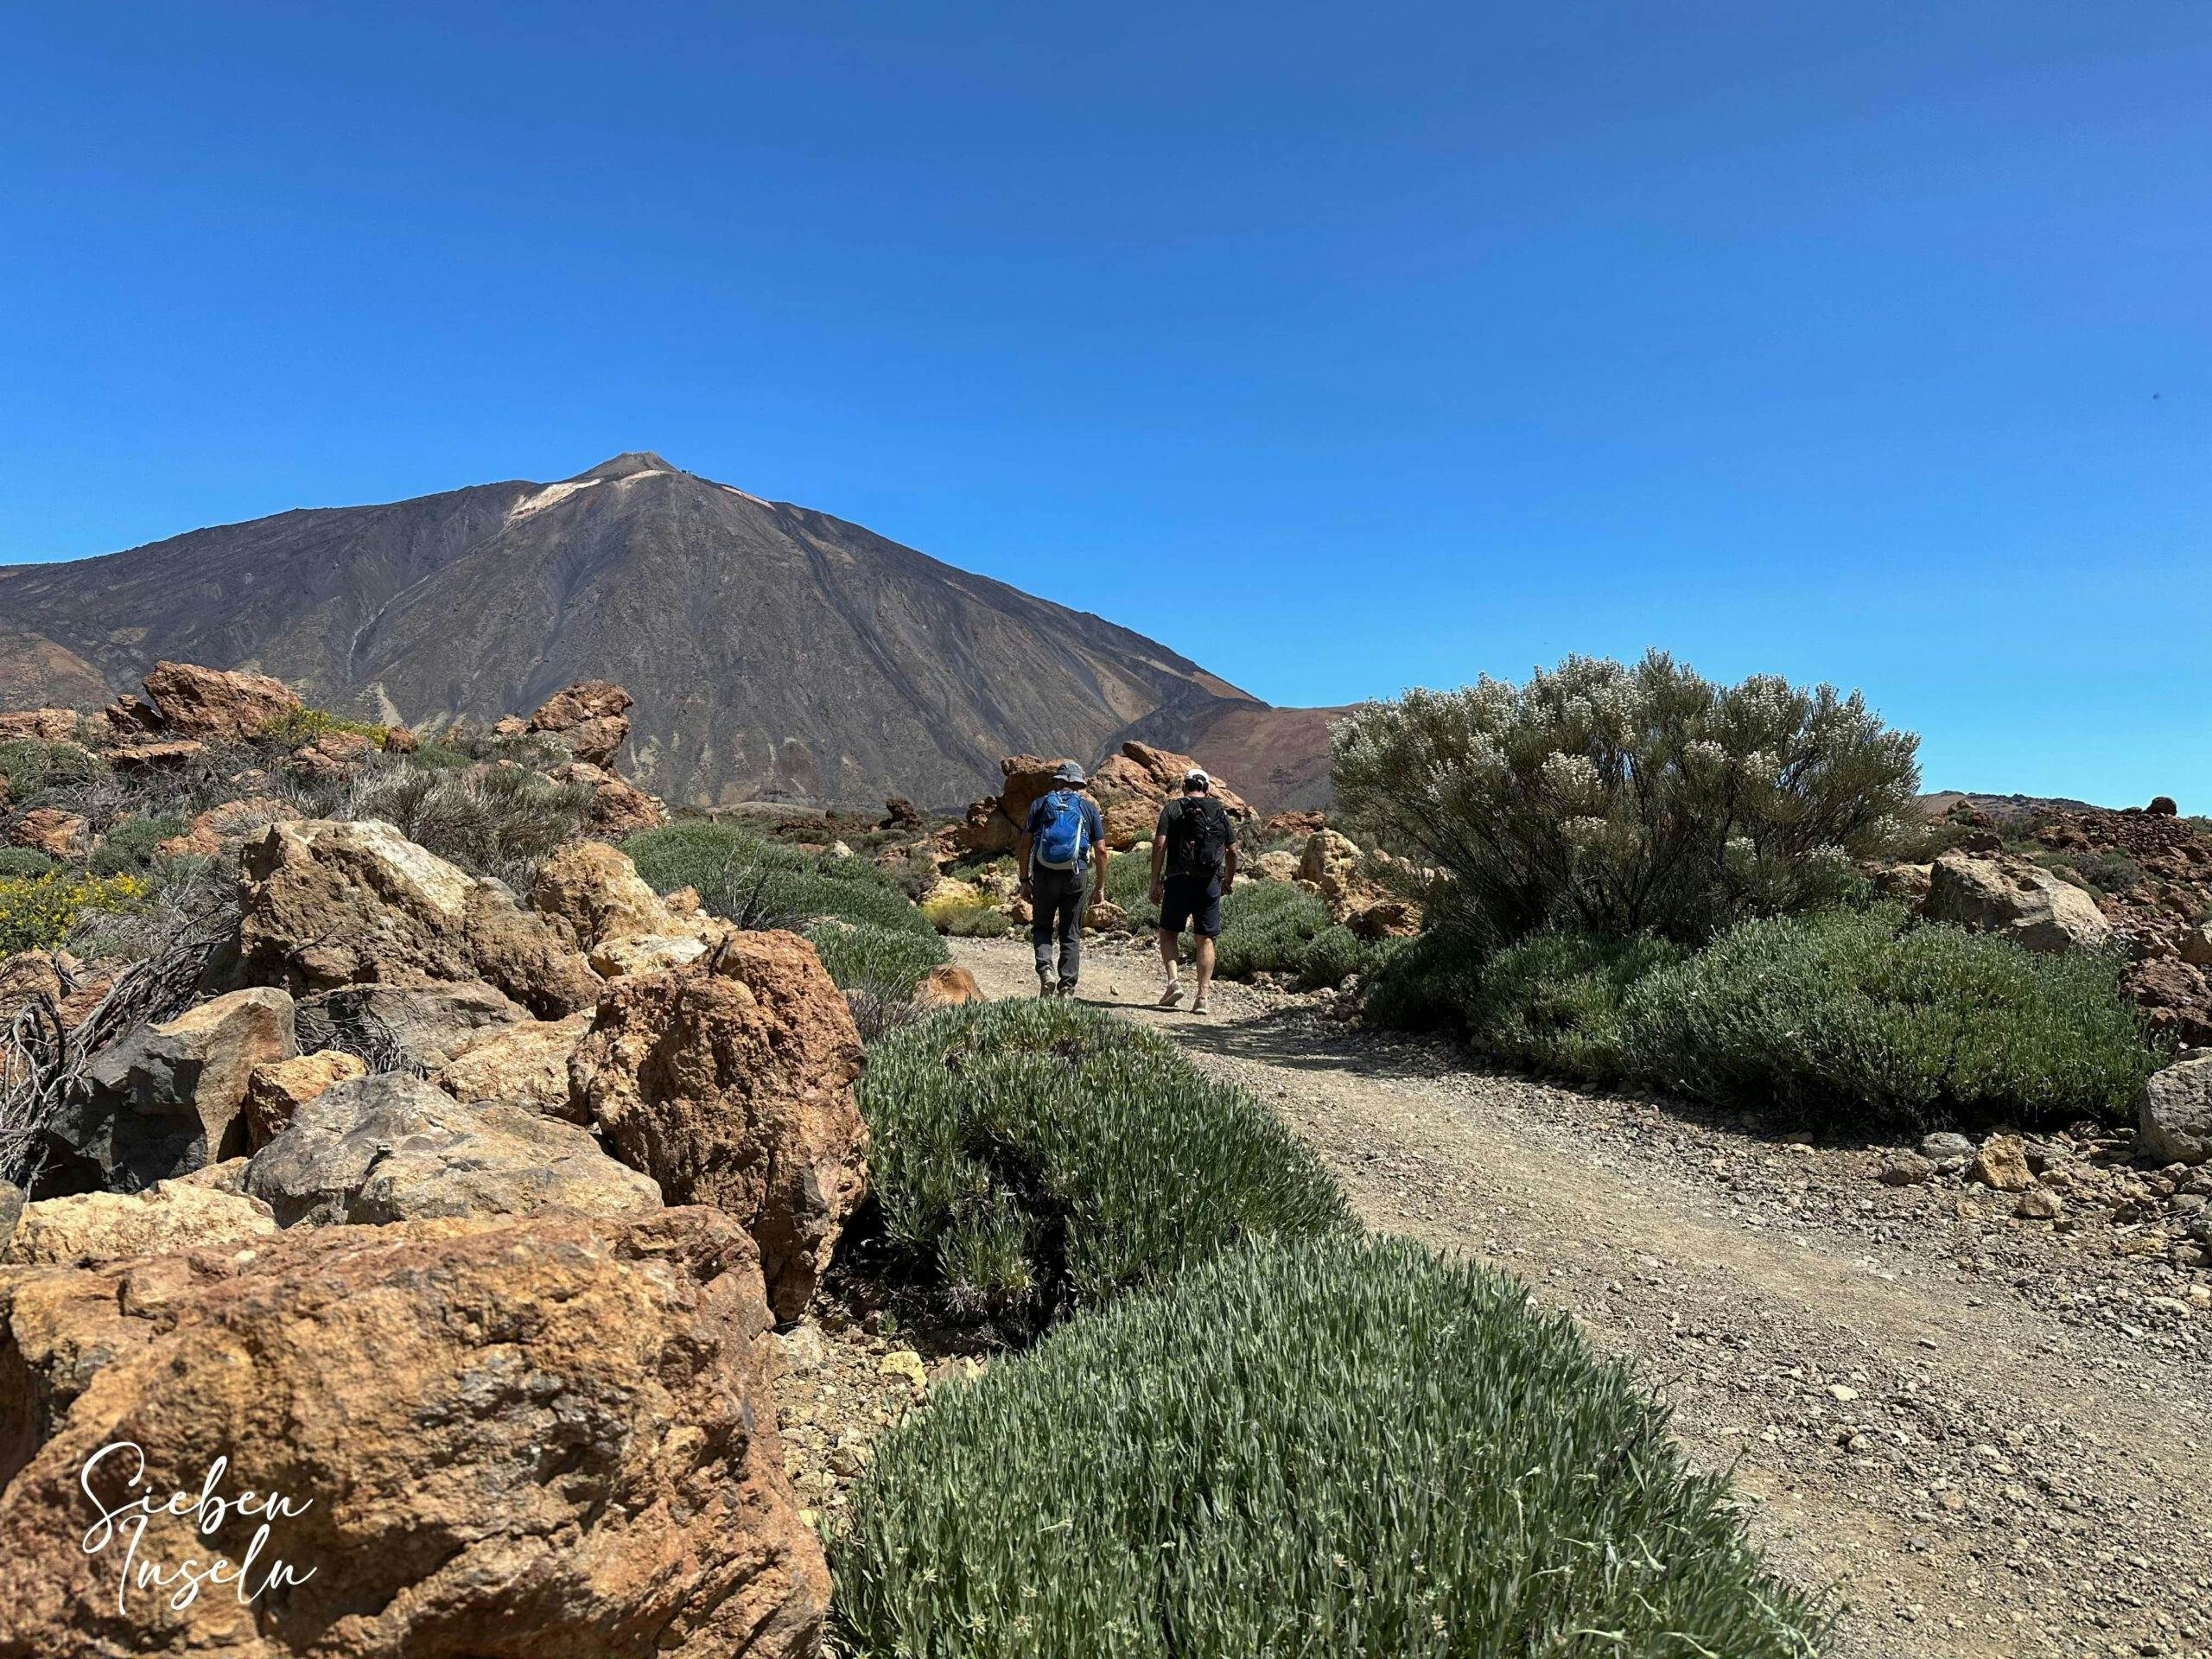 Hikers on the S-16 trail towards Teide